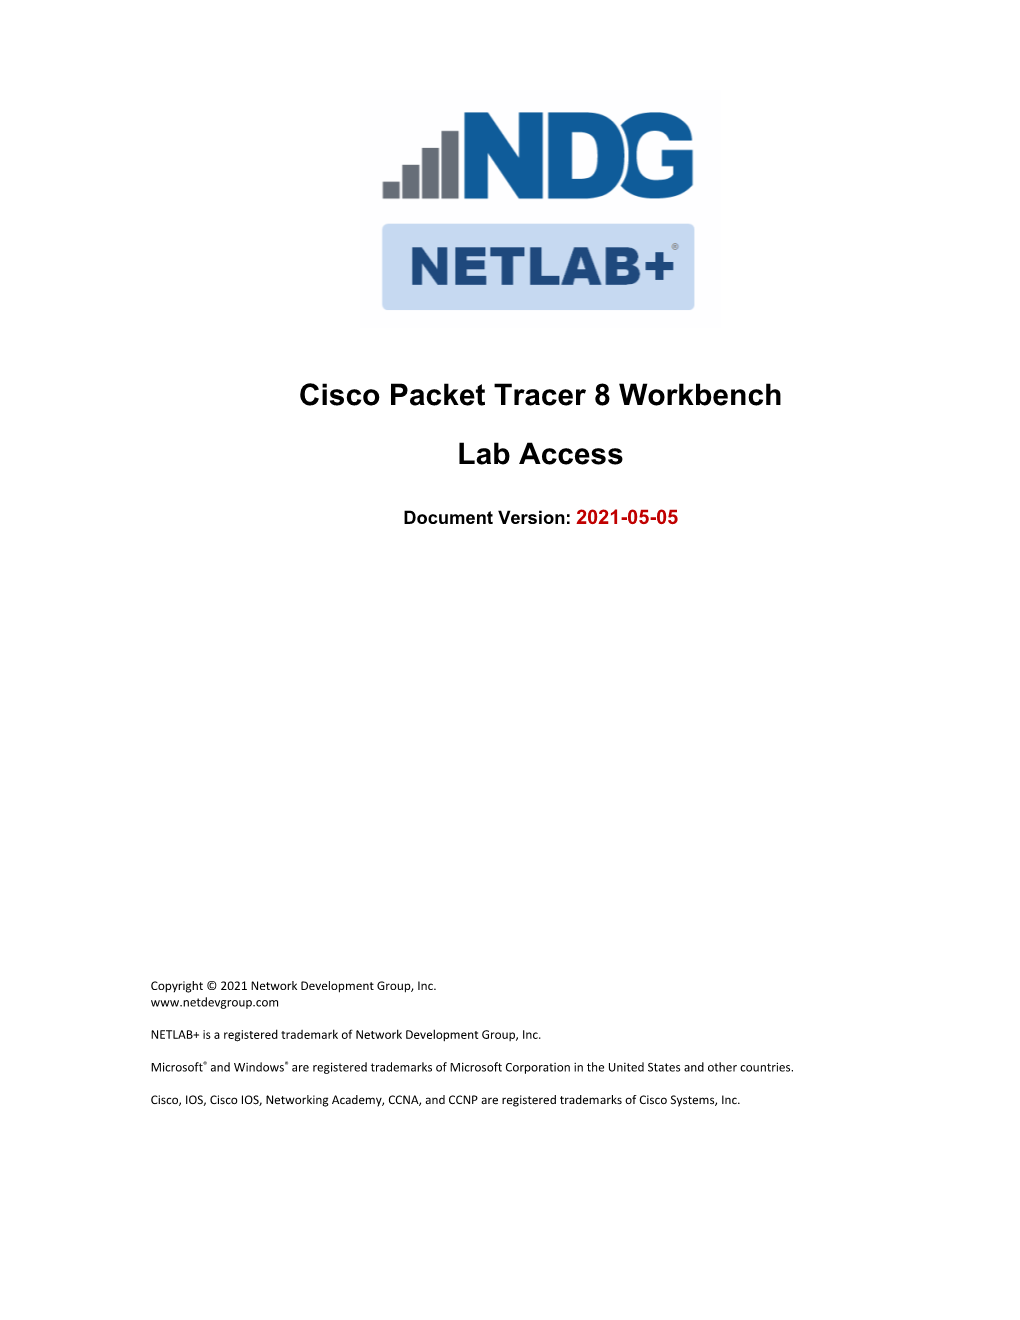 Cisco Packet Tracer 8 Workbench